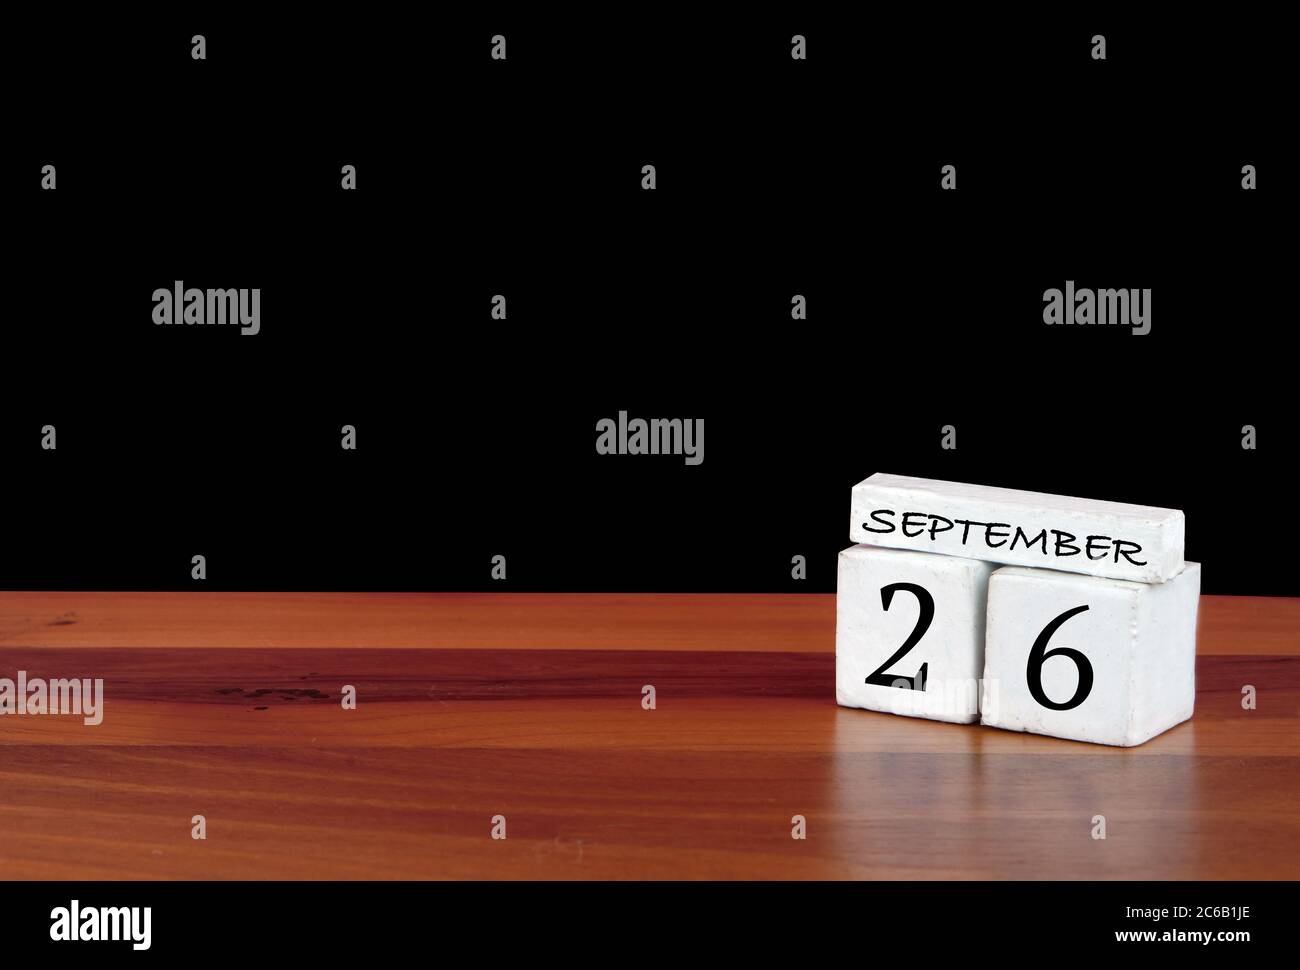 26 September calendar month. 26 days of the month. Reflected calendar on wooden floor with black background Stock Photo